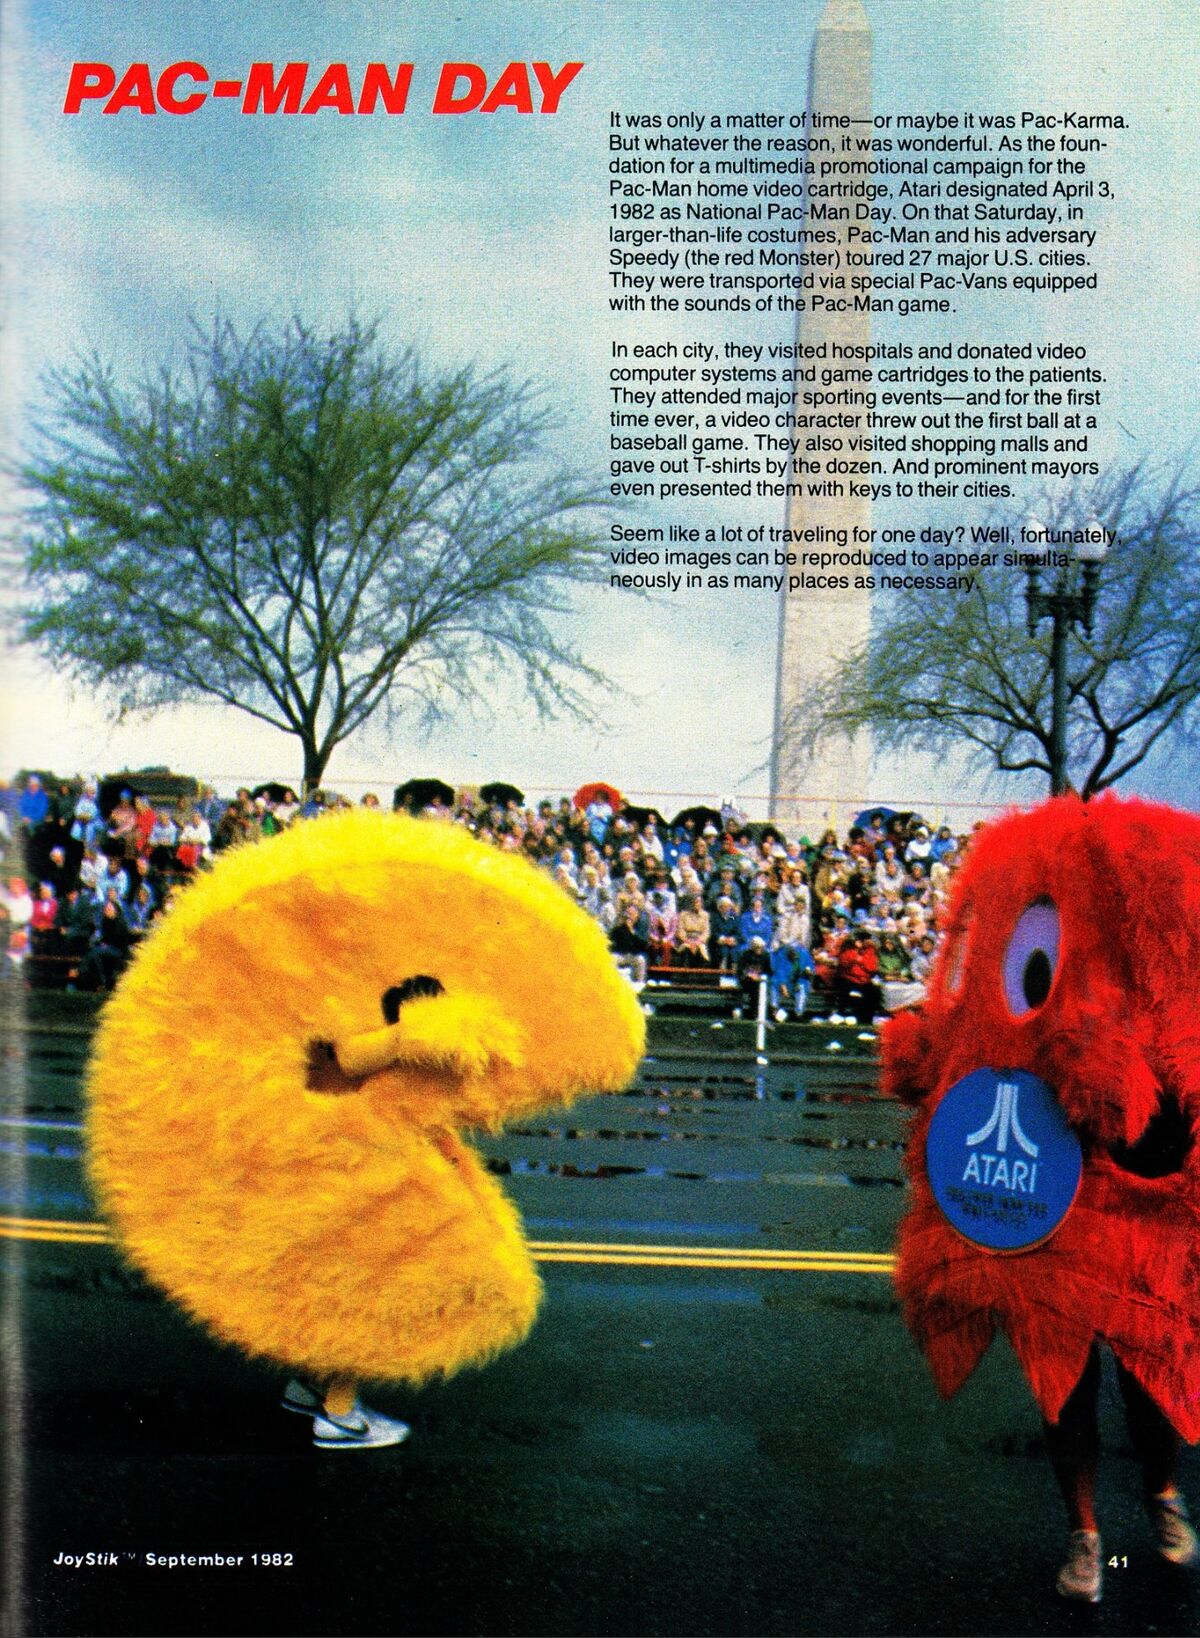 PAC-MAN - Today's the big day! Are you ready to take on